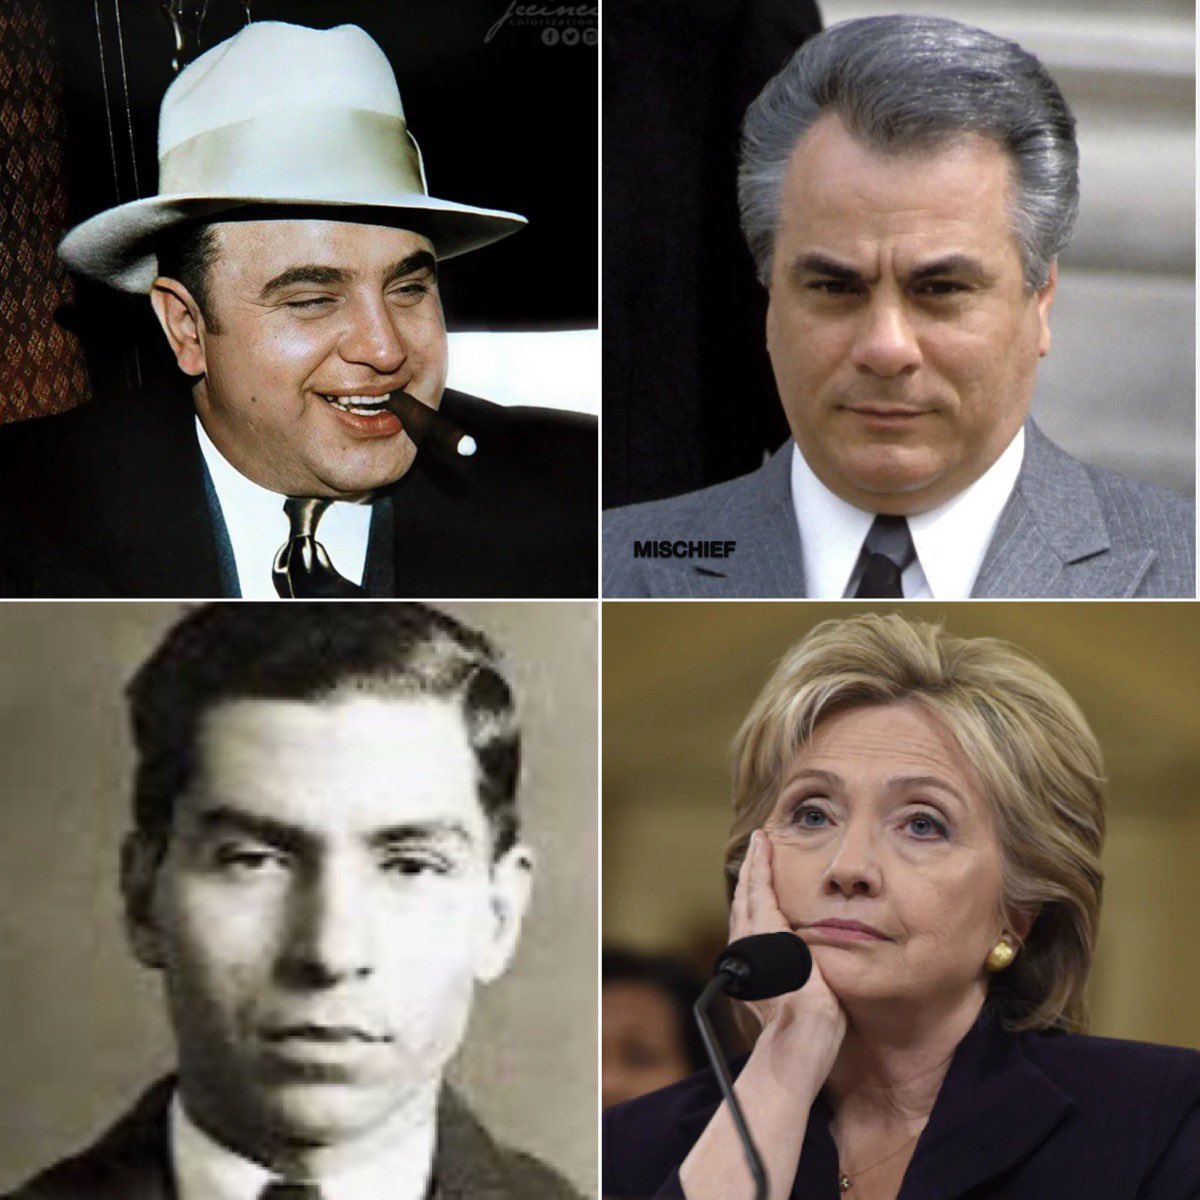 The mob bosses get thrown in prison for murder, racketeering, and corruption, yet Hillary Clinton roams free. How is that possible?